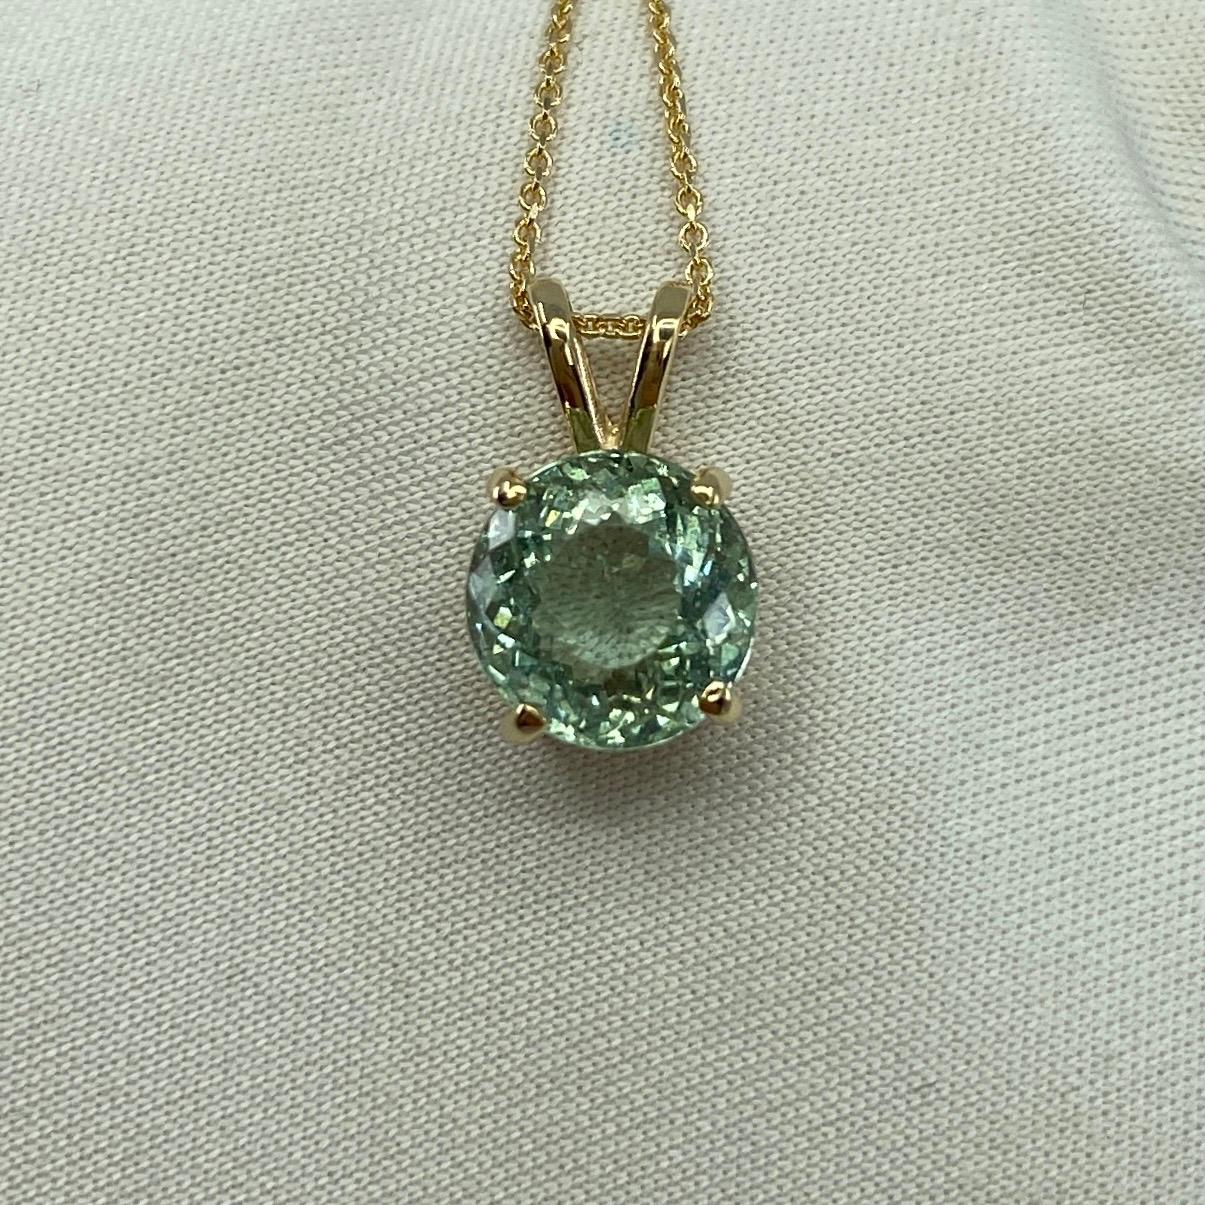 Fine Natural Green Blue Aquamarine Pendant Necklace.

2.50 Carat Aquamarine with a stunning vivid green blue colour set in a fine 14k yellow gold solitaire pendant.
The aquamarine has an excellent round brilliant cut showing lots of brightness and